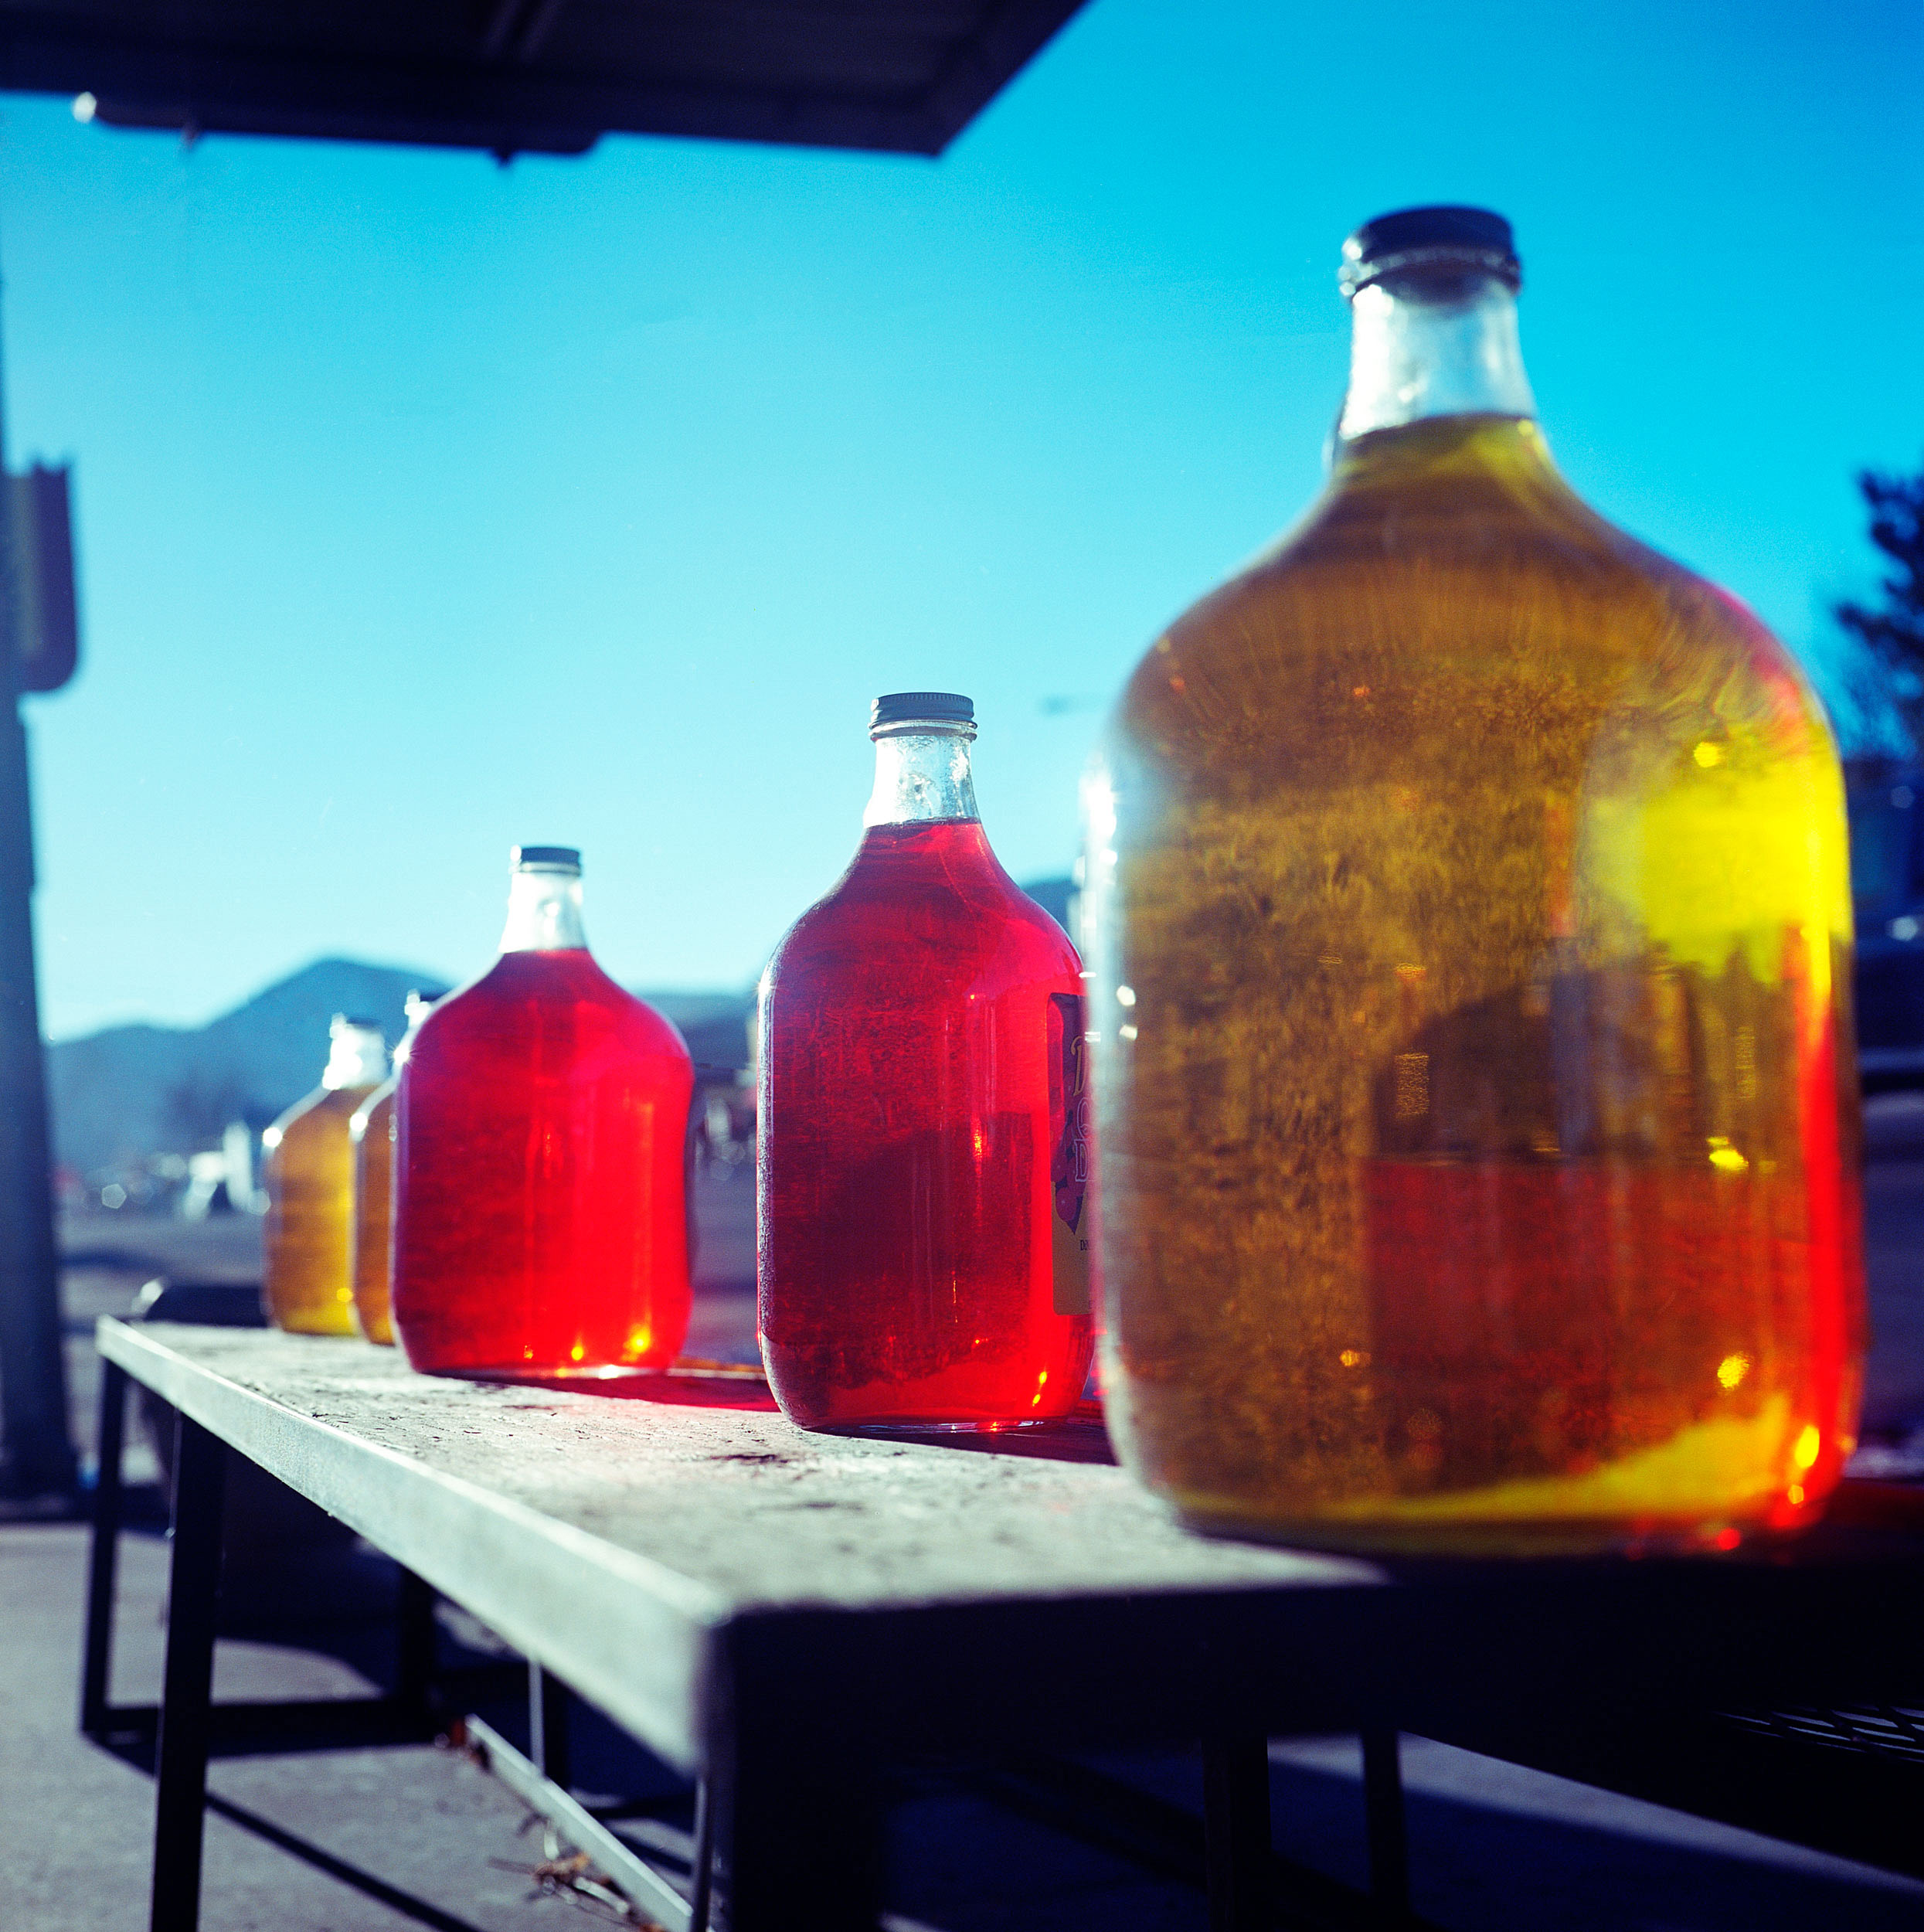  Cañon City, Colorado. These colorful cider bottles with the sun streaking through them caught my eye, but not just because of the color, but because they were very dusty. It boggled my mind that someone would put these bottles out for display to ent